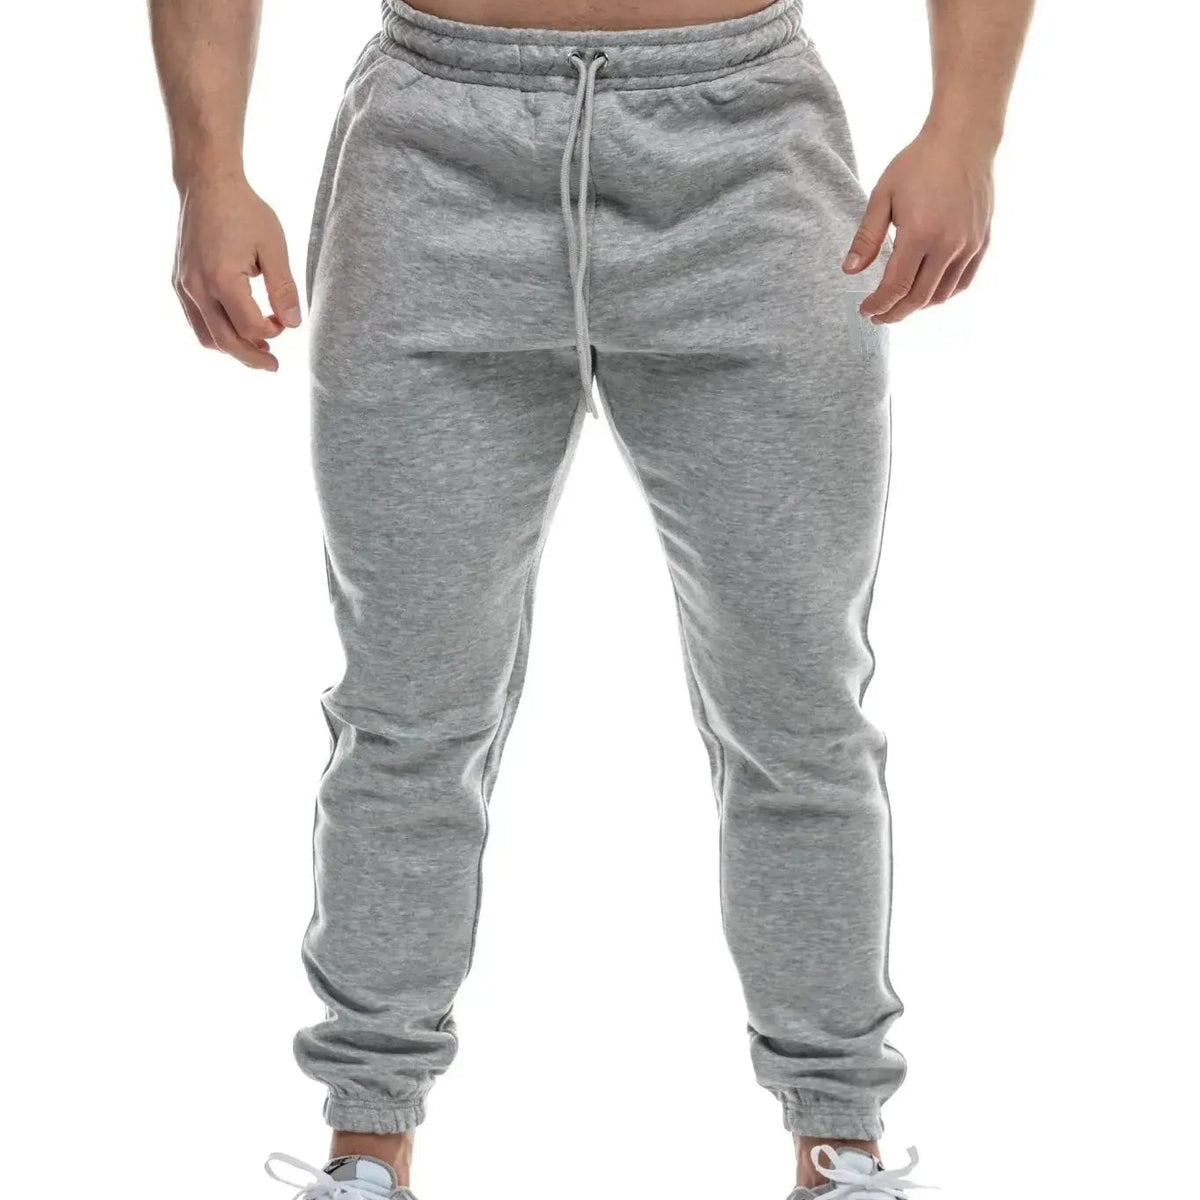 Mens Ponte Jogger Pants - All in Motion Light Gray XXL Free Ship New